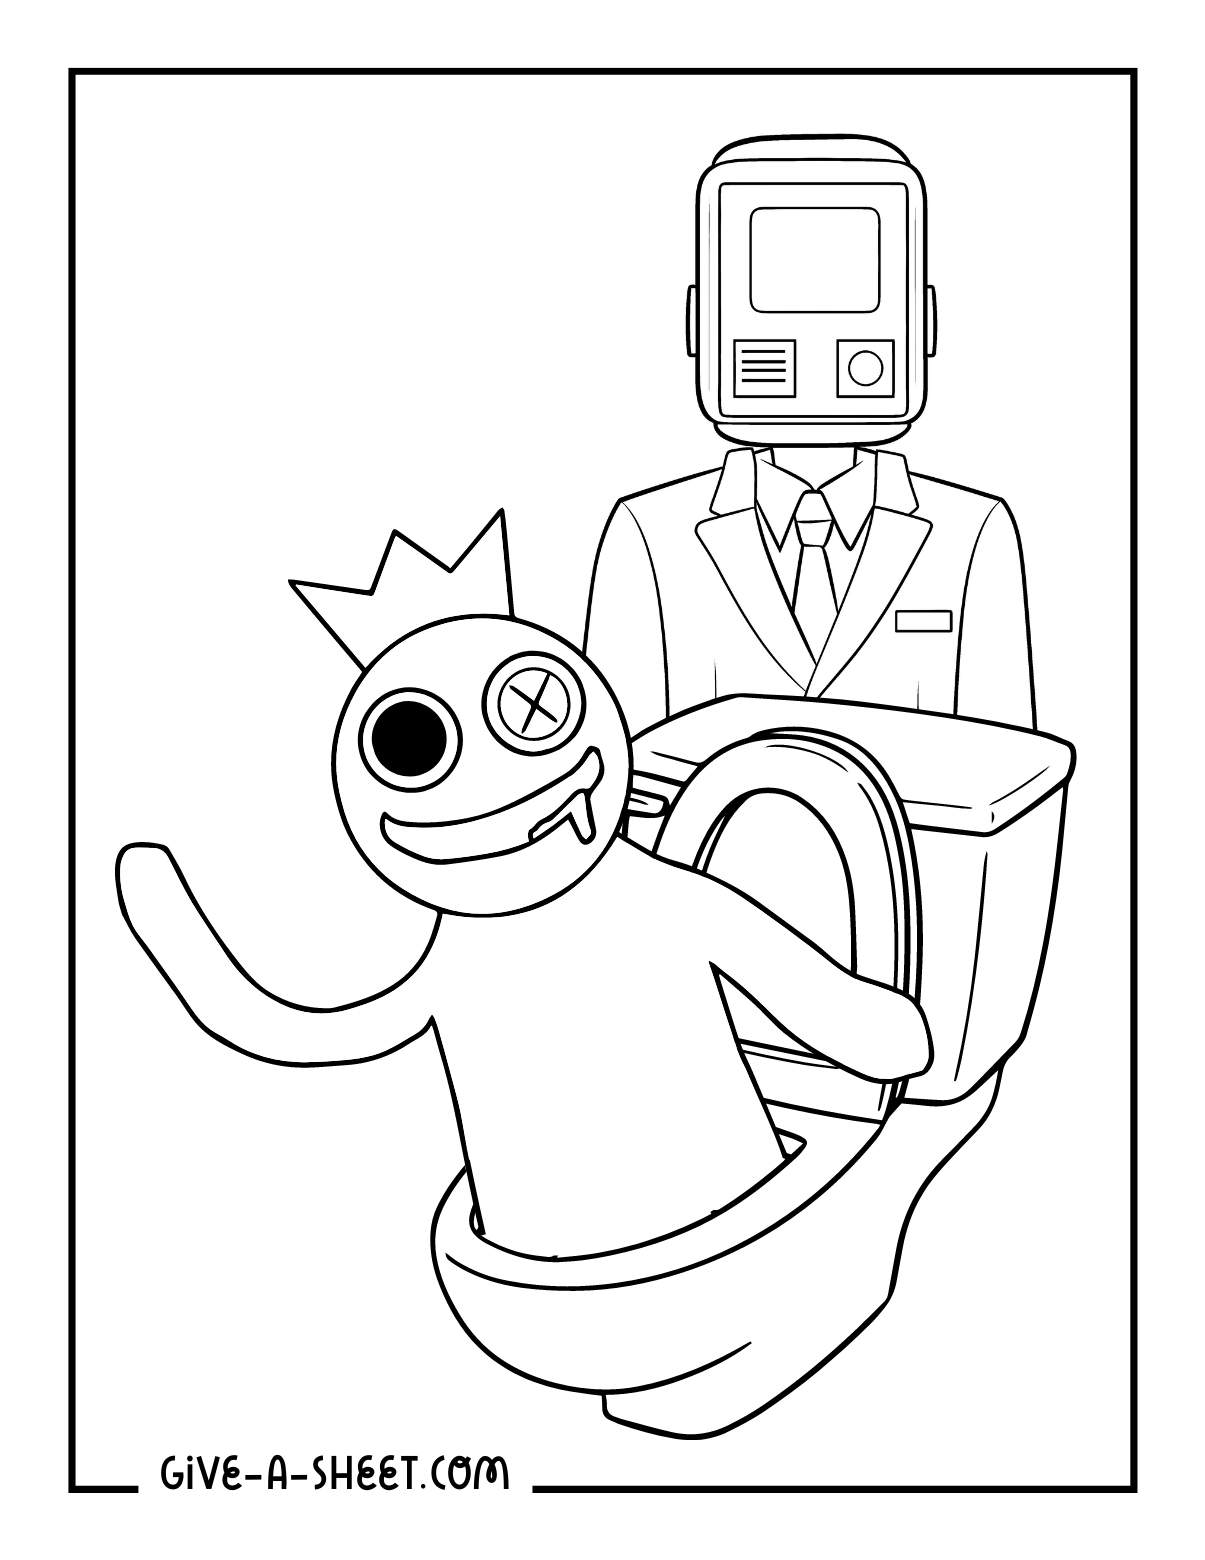 World of skibidi toilet coloring pages for kids.